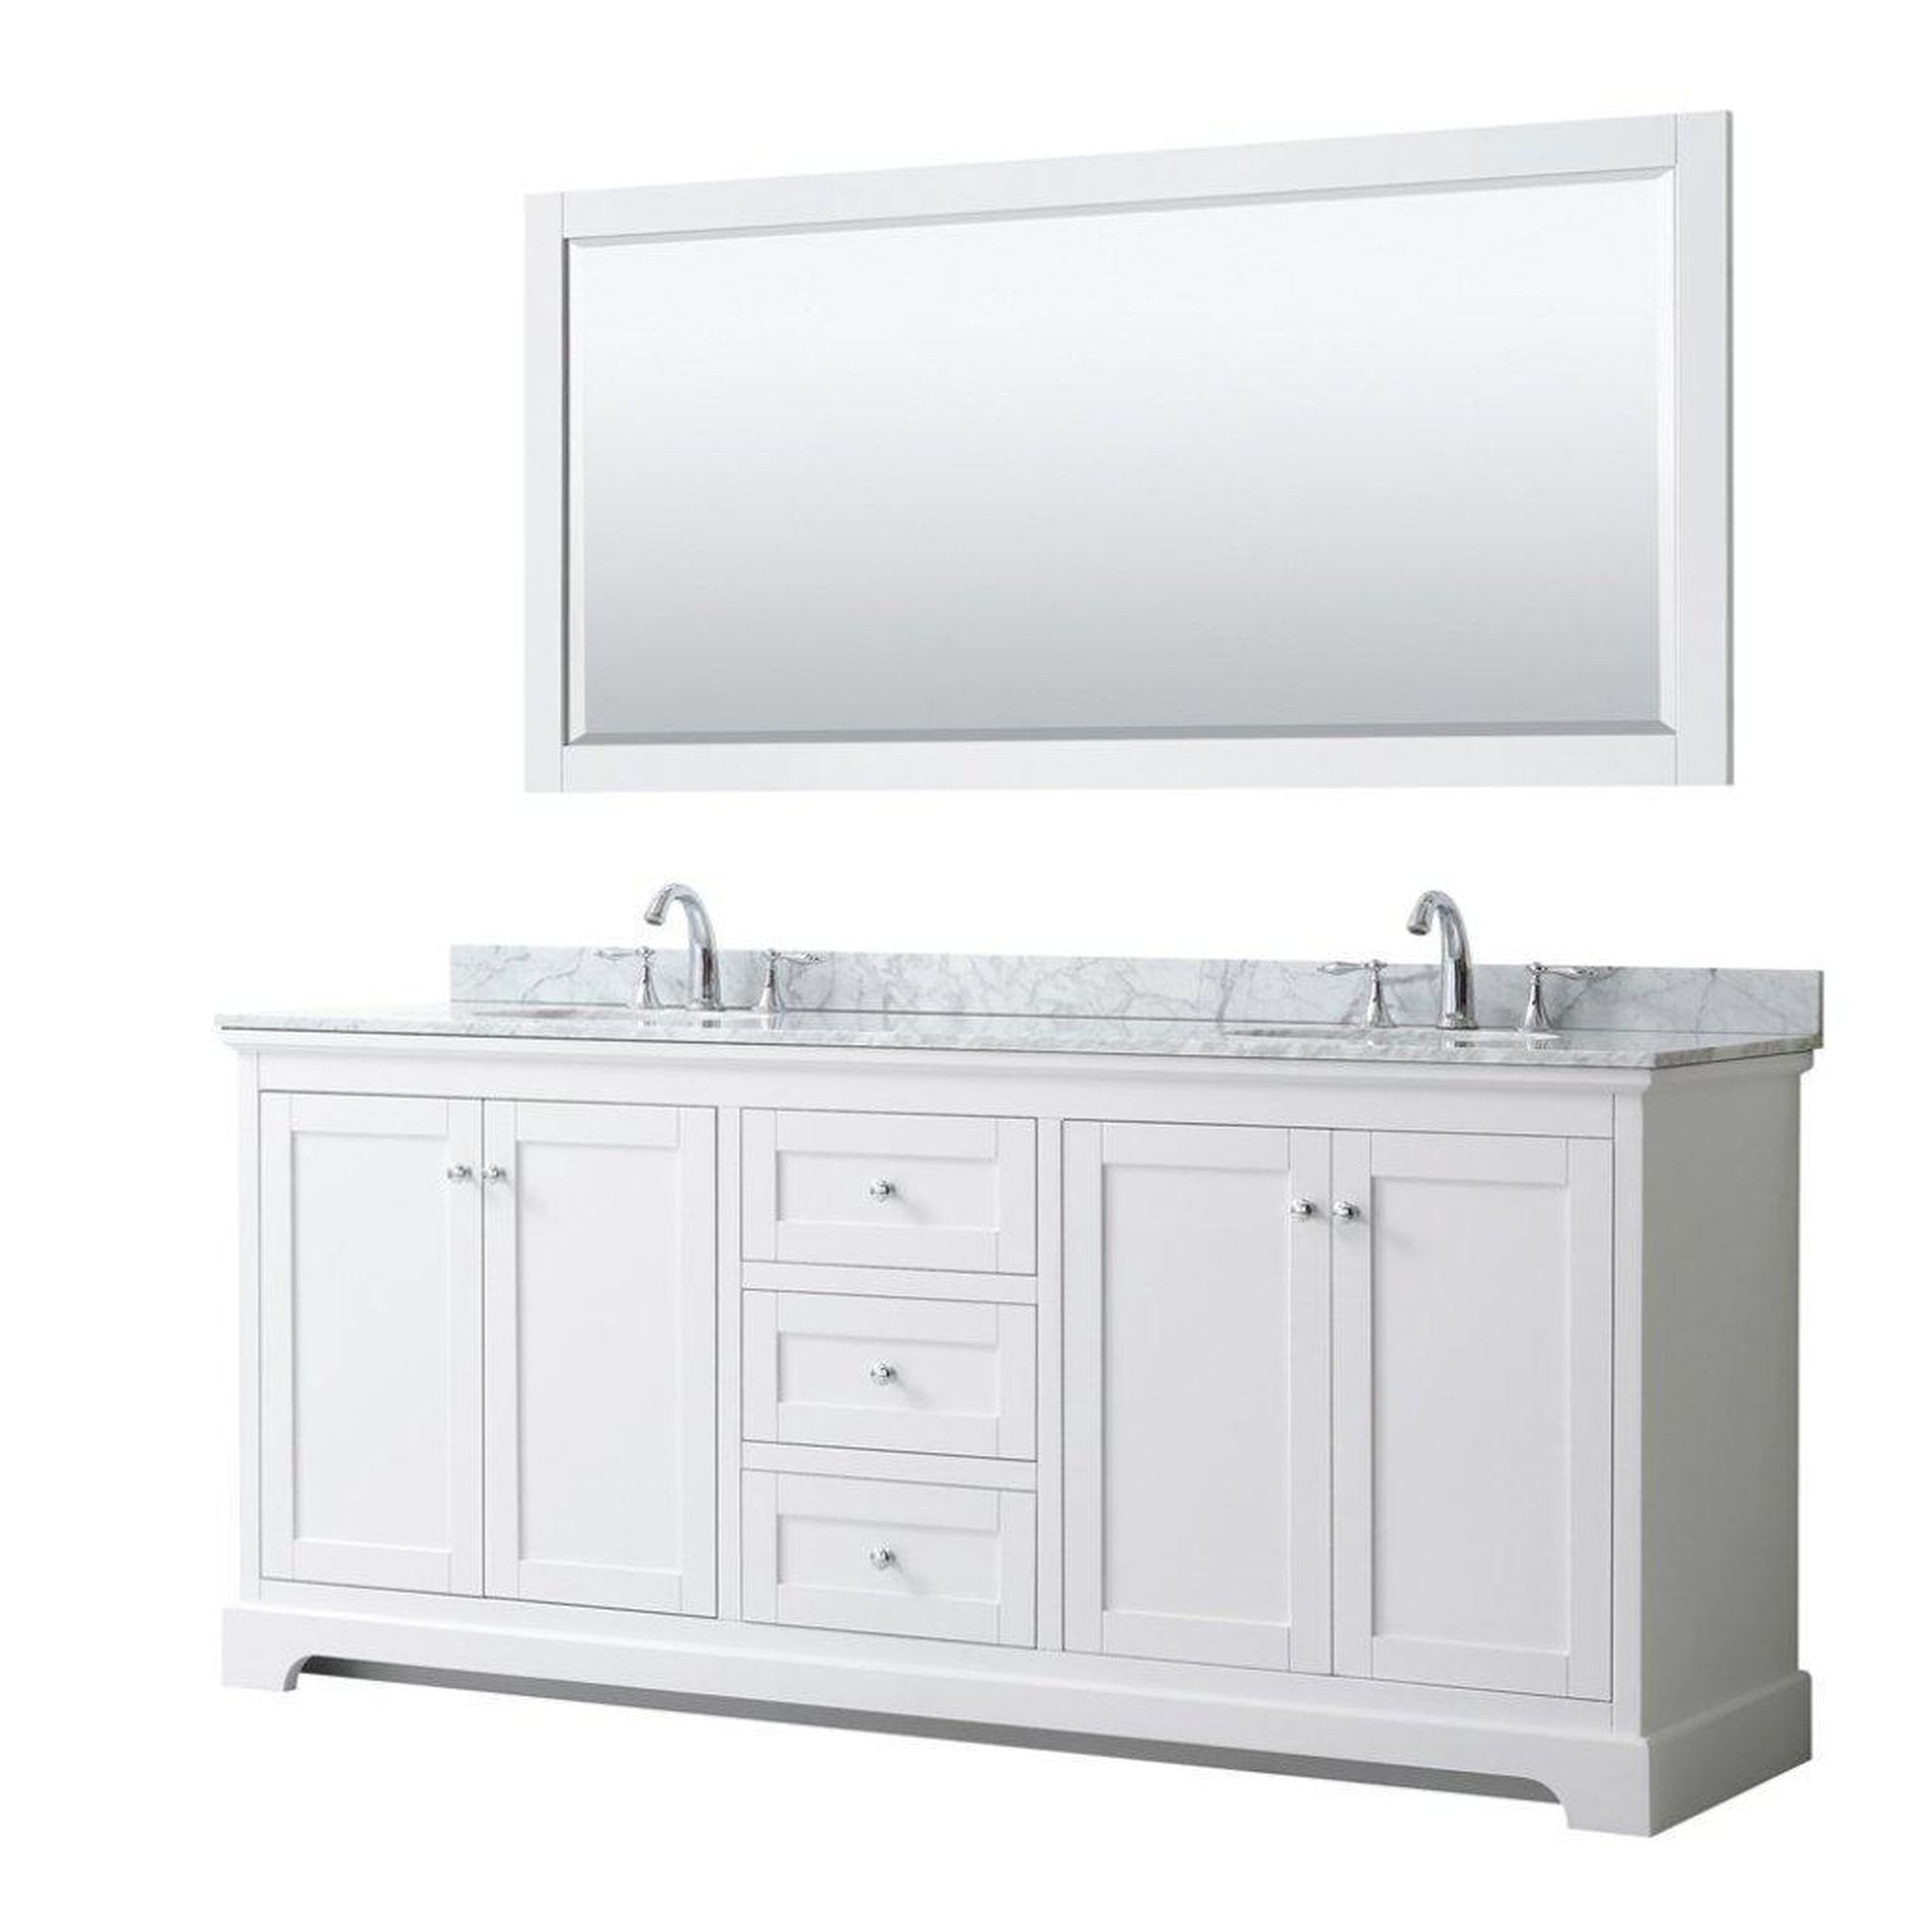 Wyndham Collection Avery 80" White Double Bathroom Vanity Set, White Carrara Marble Countertop With 3-Hole Faucet, 8" Oval Sink, 70" Mirror, Polished Chrome Trims